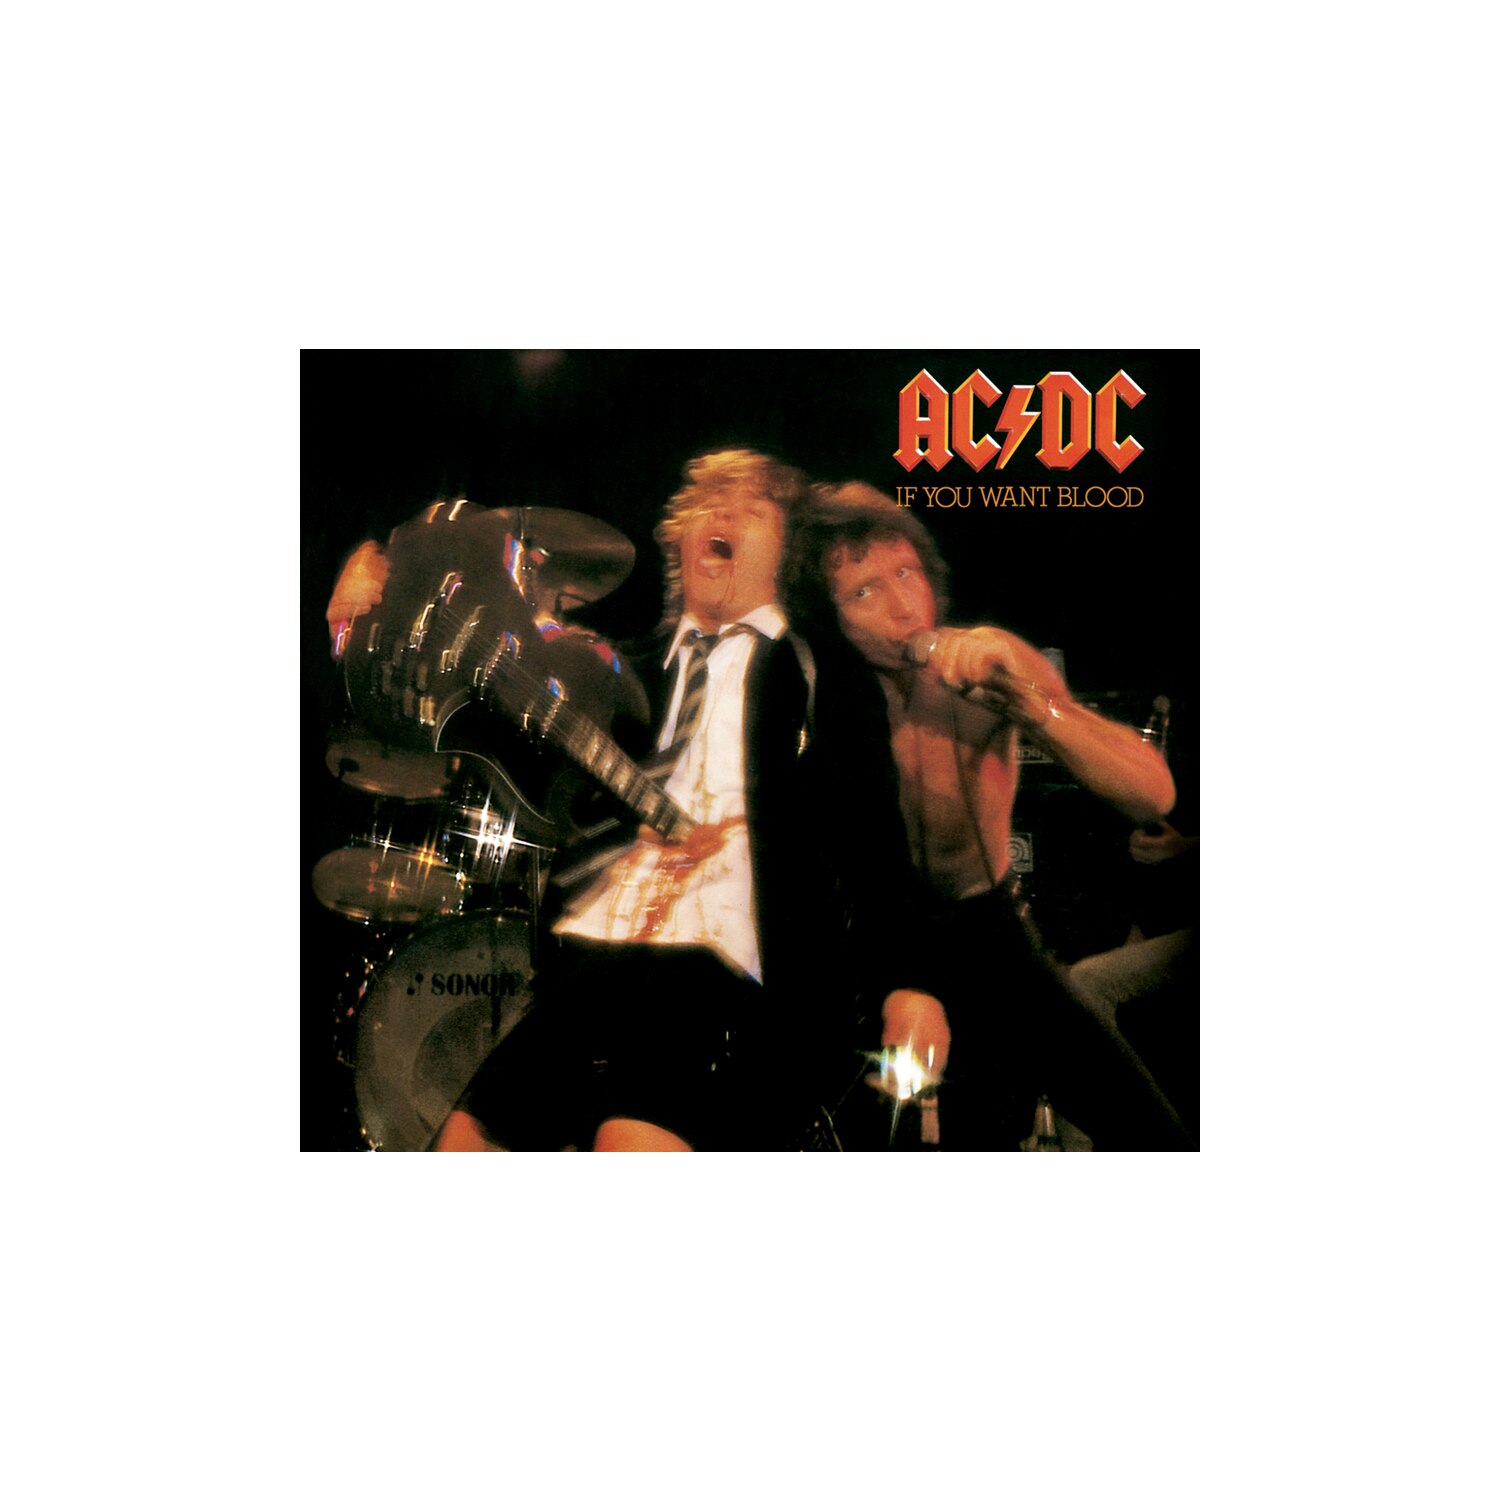 IF YOU WANT BLOOD YOU'VE GOT IT -- AC/DC